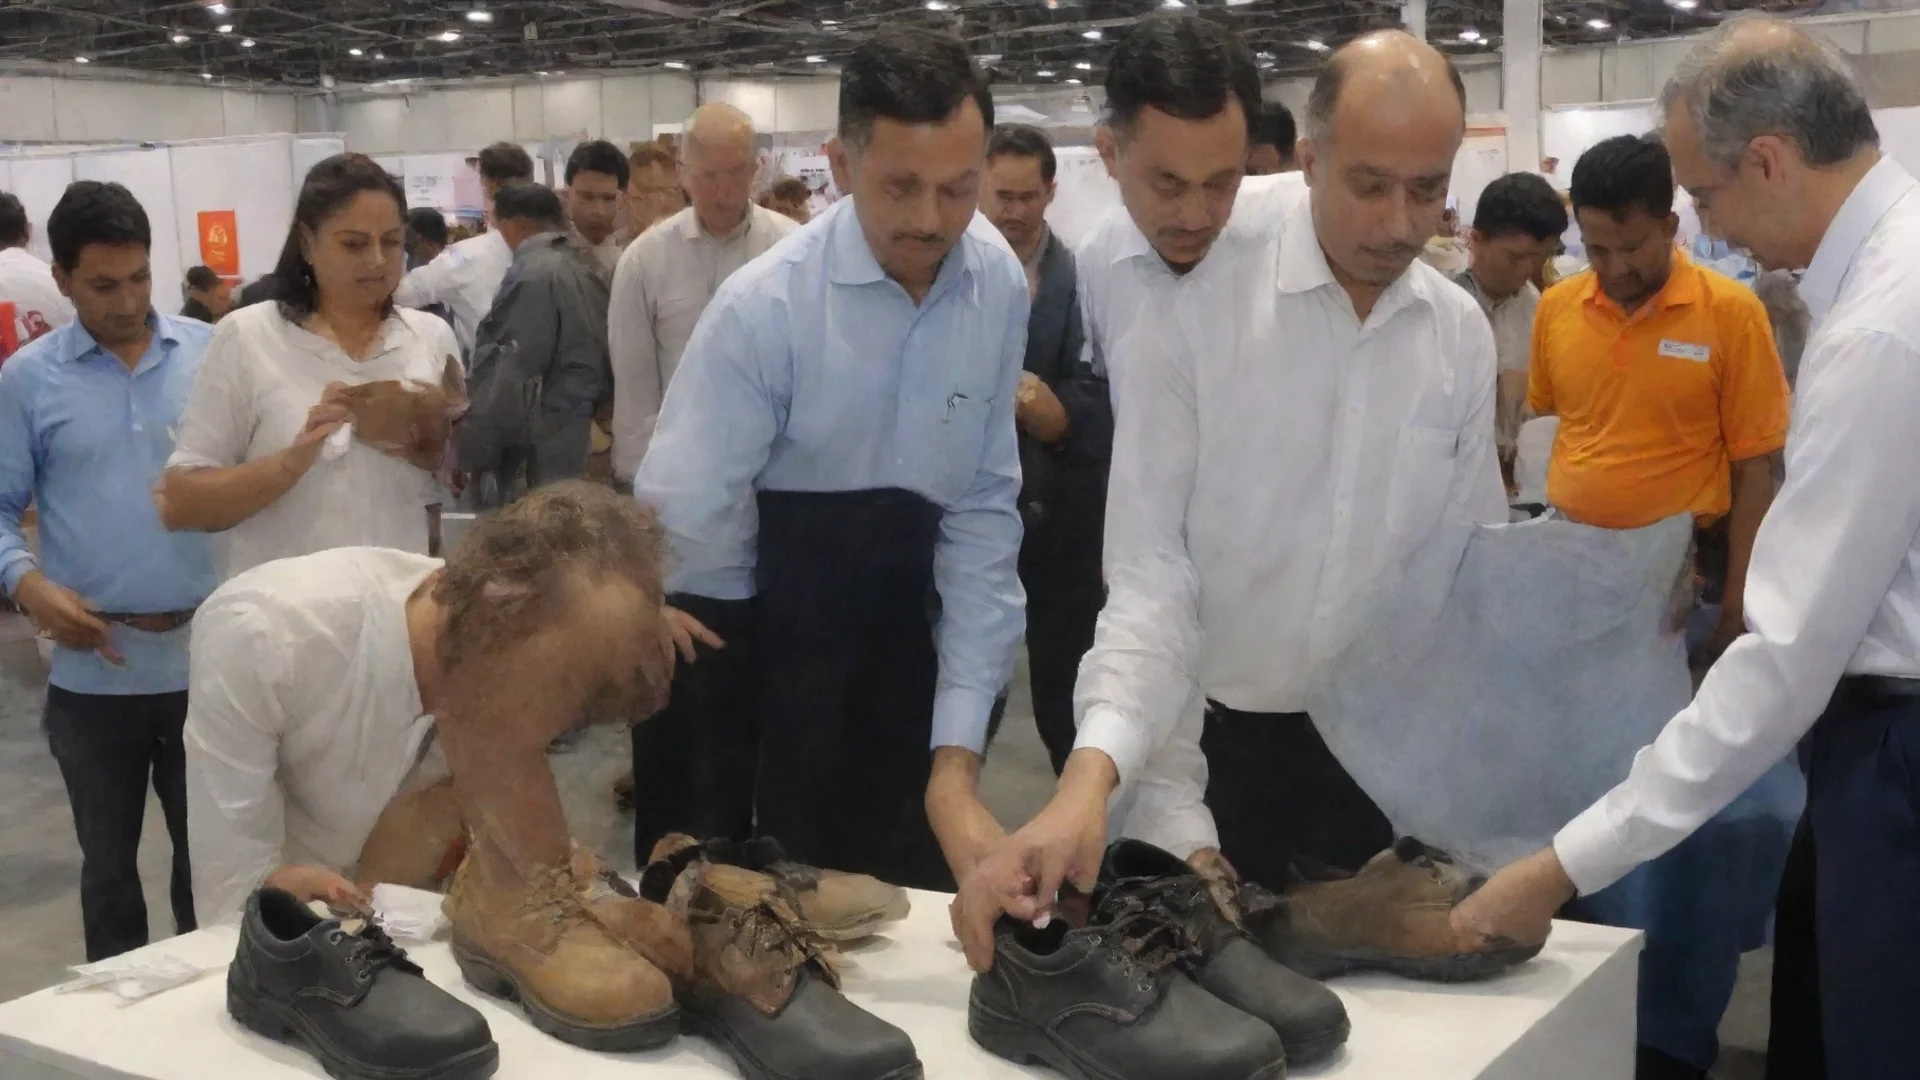 trending a safety footwear company staff showing there new safety shoes in an industrial expo to the people who visited there expo near there stall where safety shoes are kept good looking fantastic